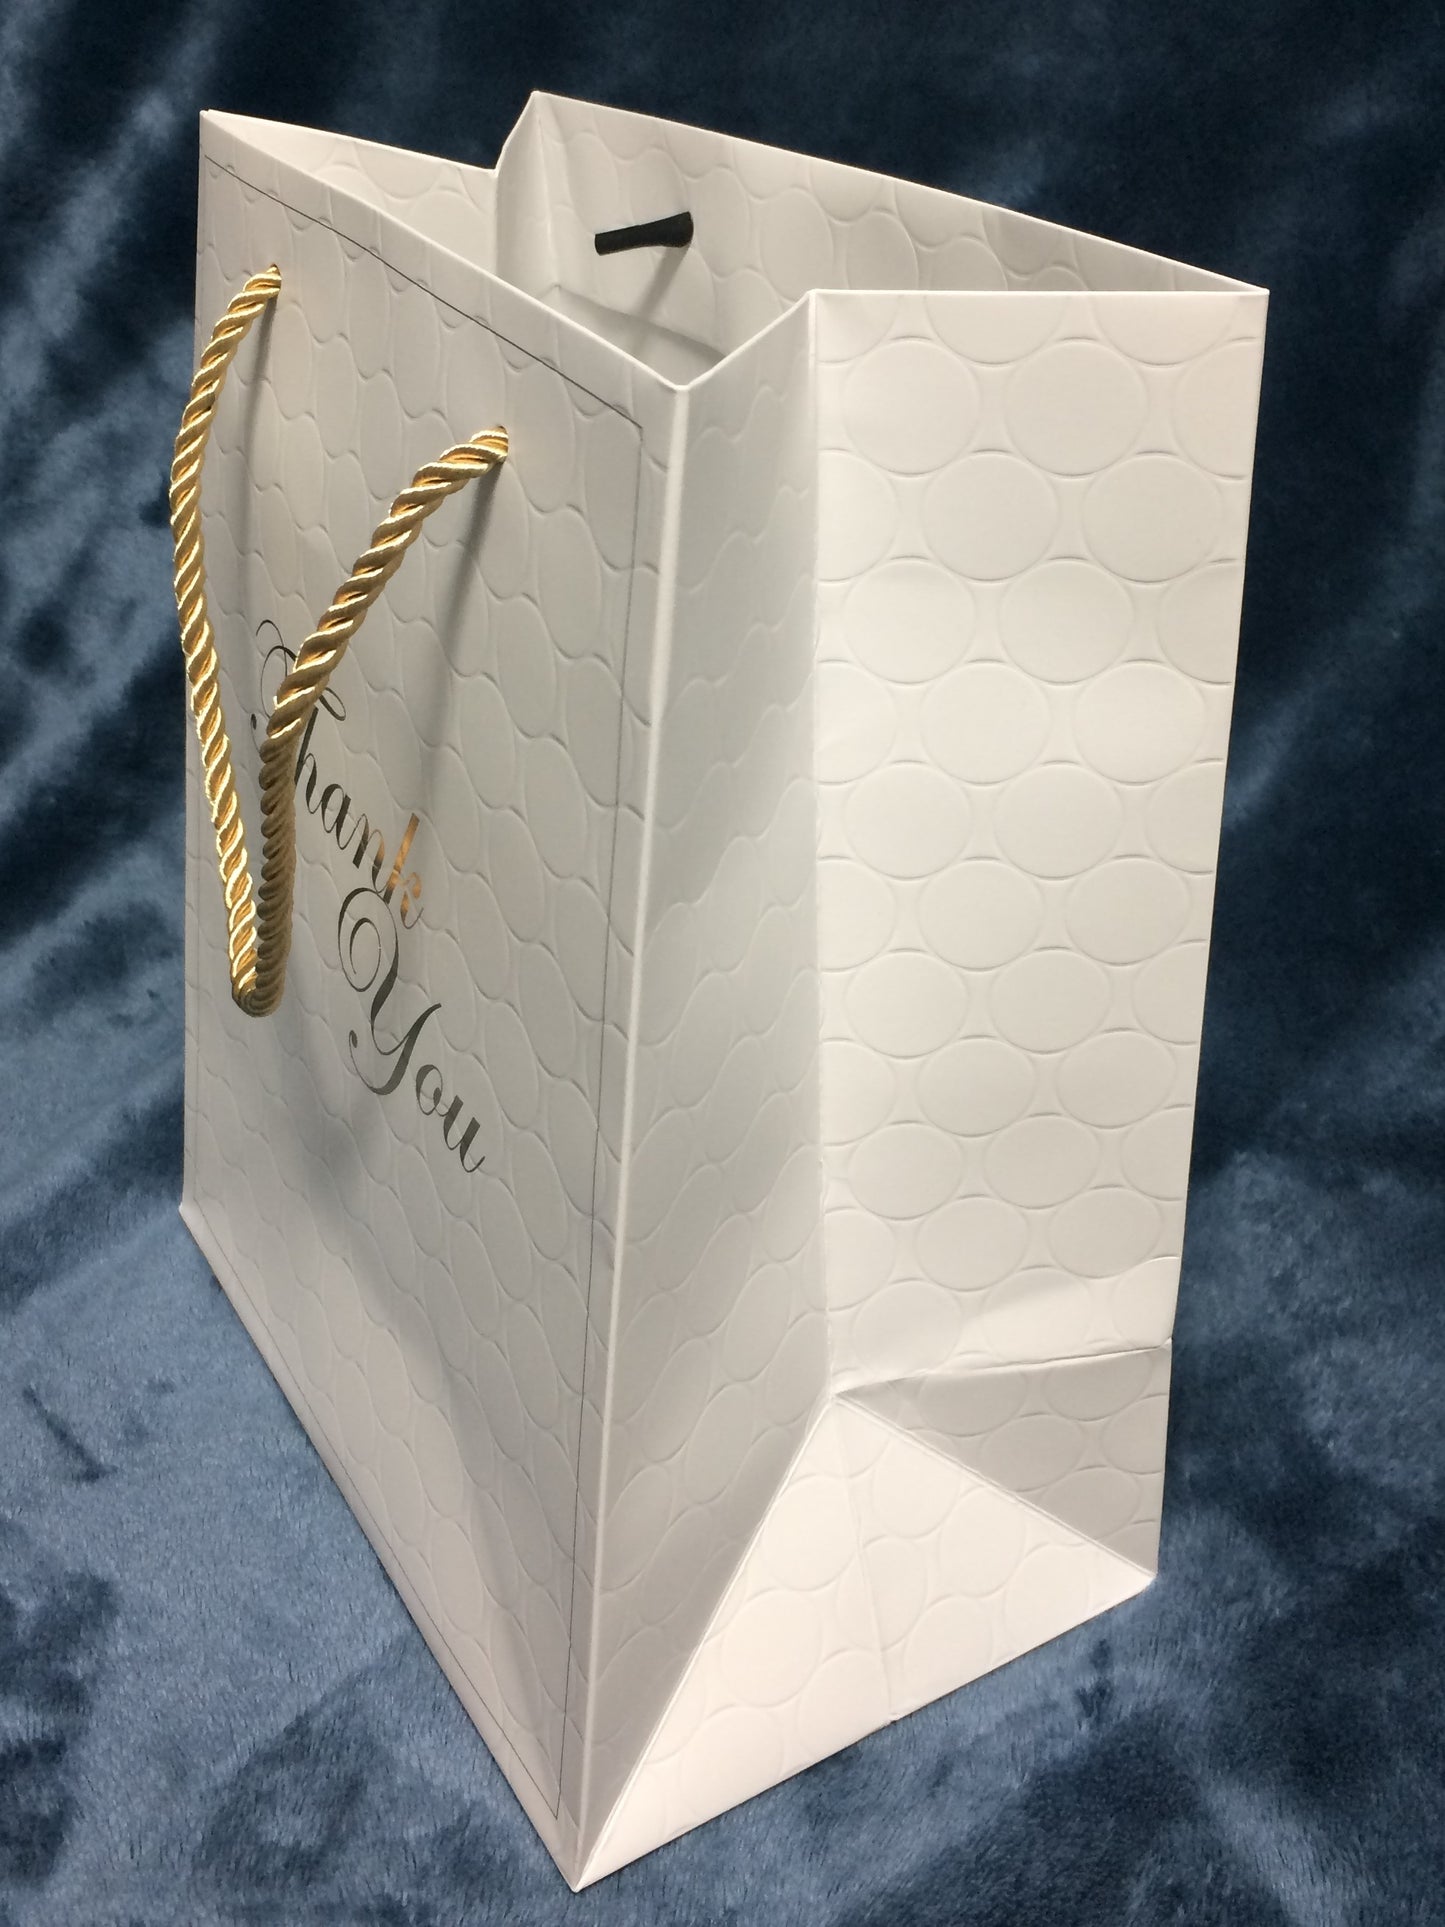 8x10 White Thank You Gift Bags with Handles 12 Pcs Paper Medium Fancy Gold Foil Luxury Event Shopping 8x5x10 Premium Quality Cute Matte Modern Elegant Embossed Birthday Merchandise Clothing Business Wedding